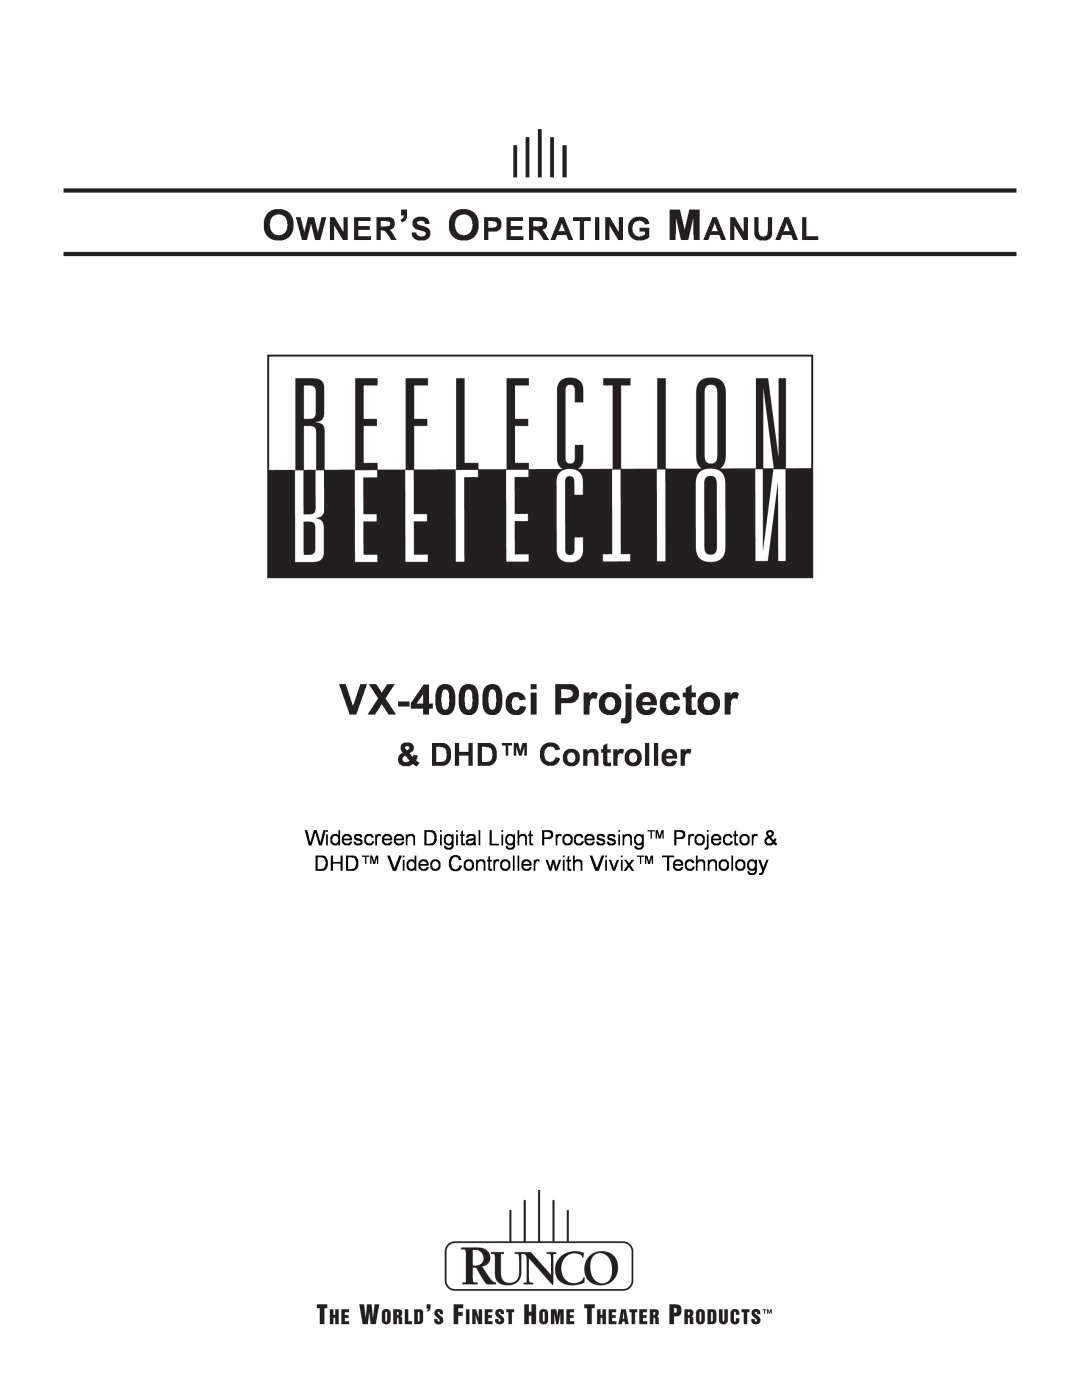 Runco manual Owner’S Operating Manual, DHD Controller, VX-4000ci Projector 